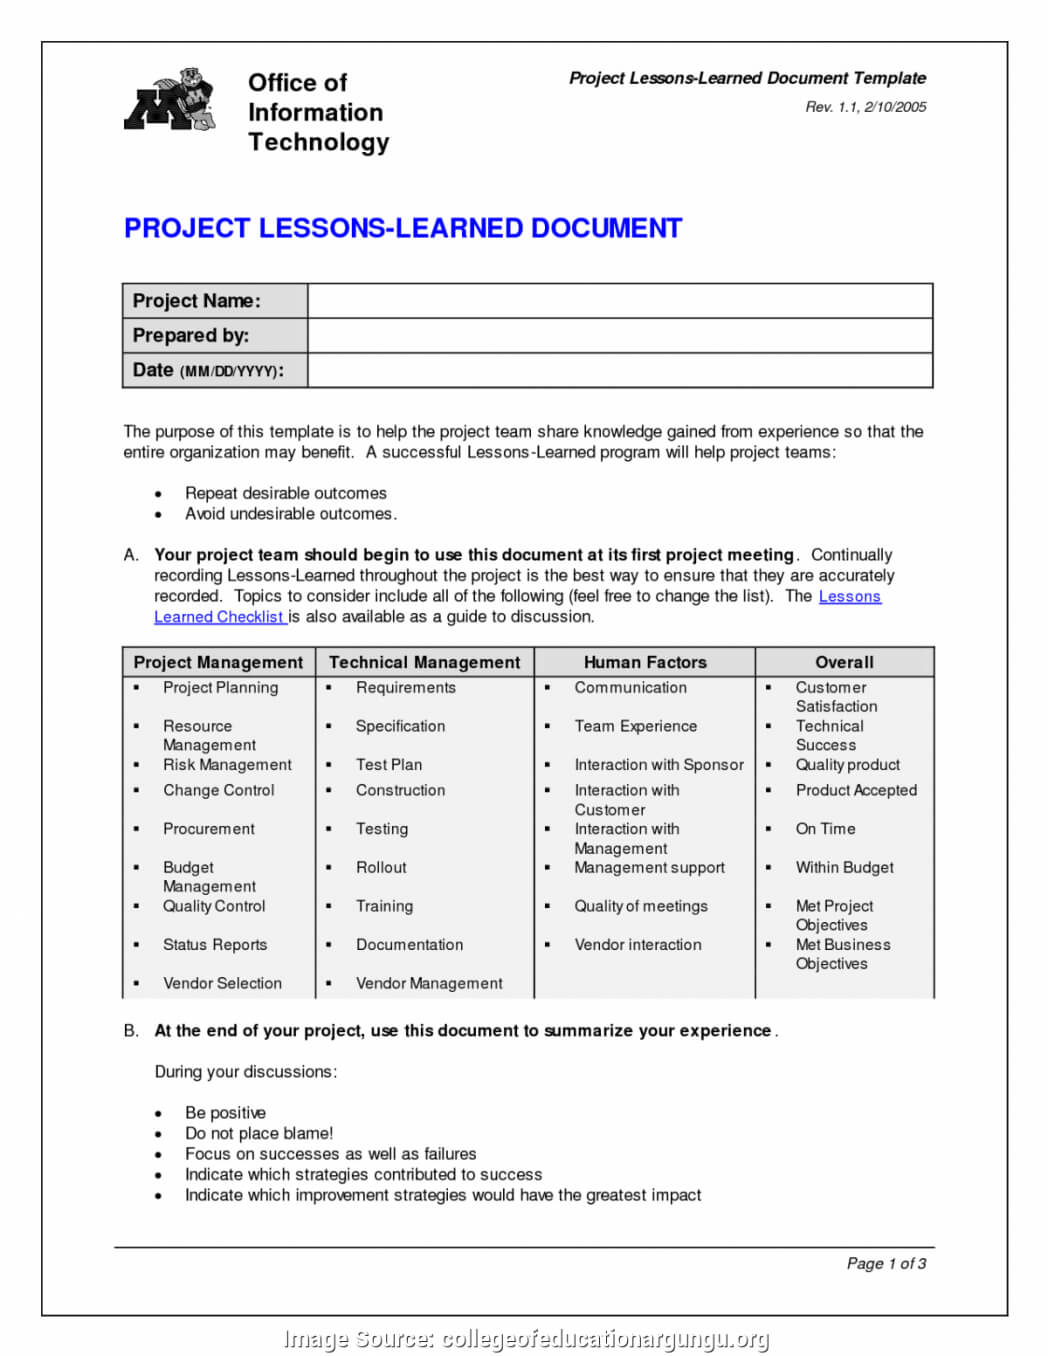 Project Management Final Report Template – Atlantaauctionco Throughout Project Management Final Report Template